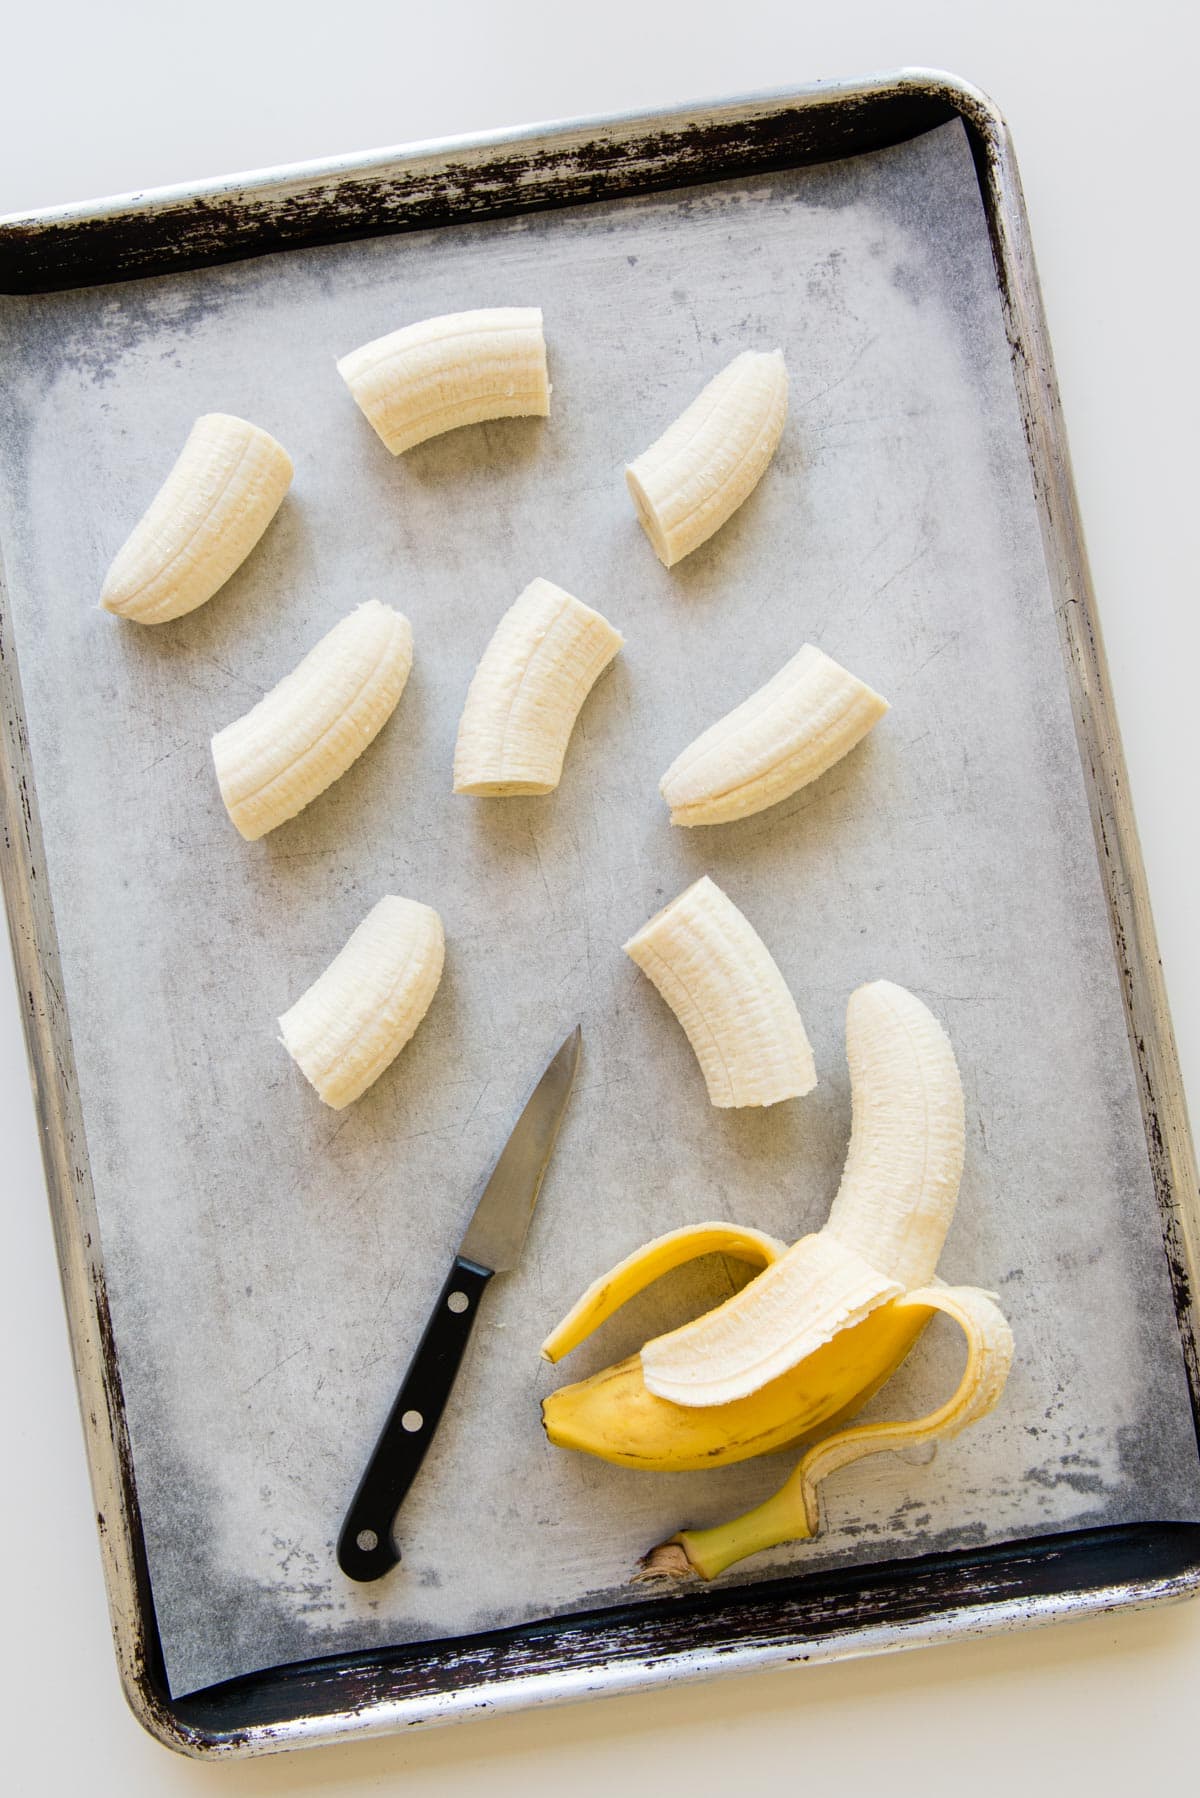 chopped banana pieces on a parchment lined tray